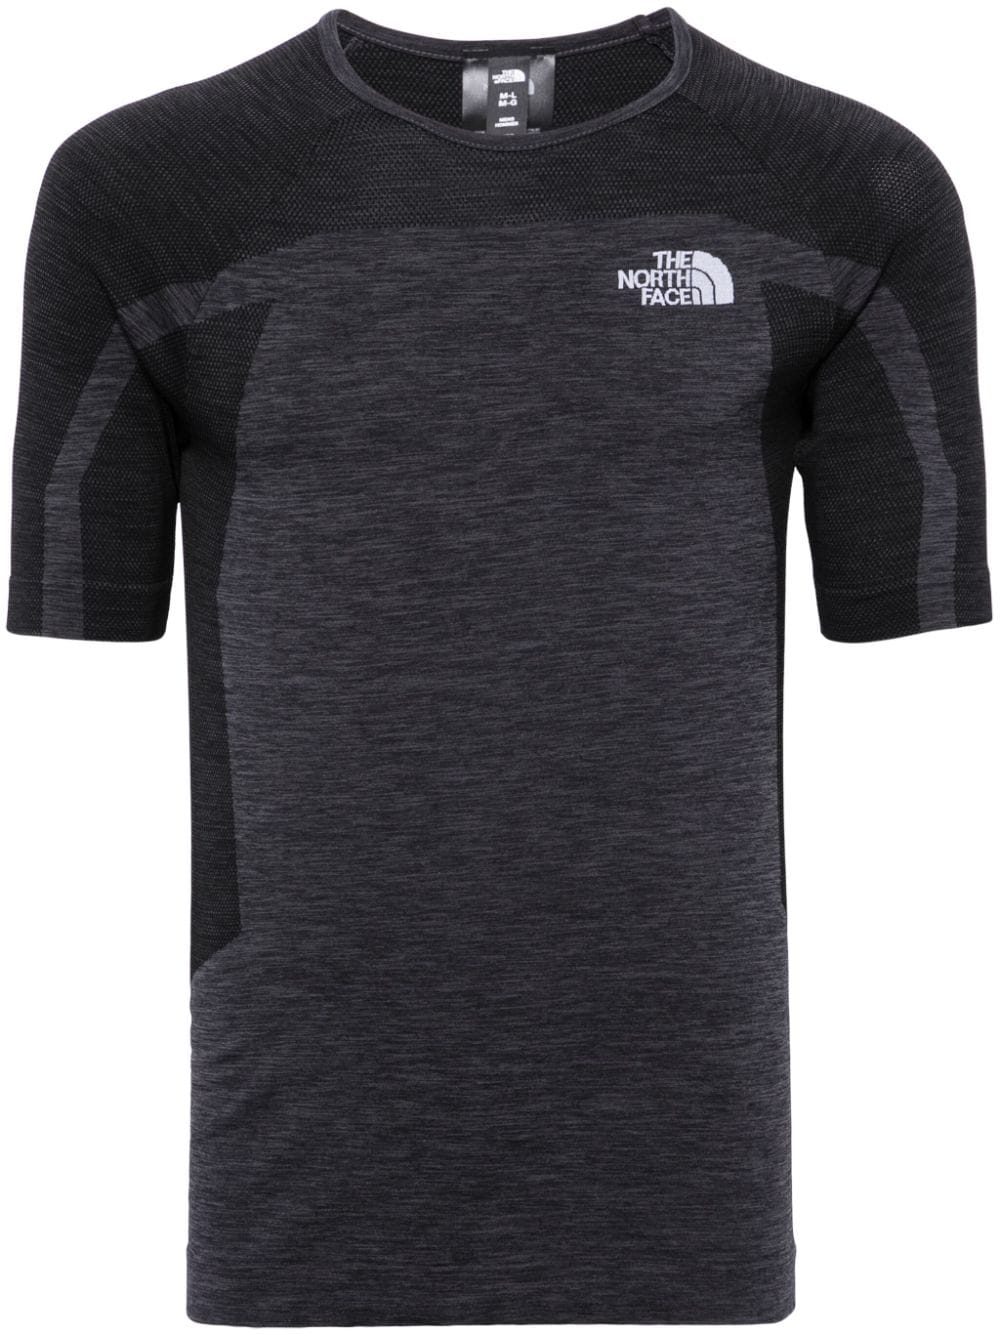 The North Face Mountain Athletics Lab T-shirt - Grey von The North Face